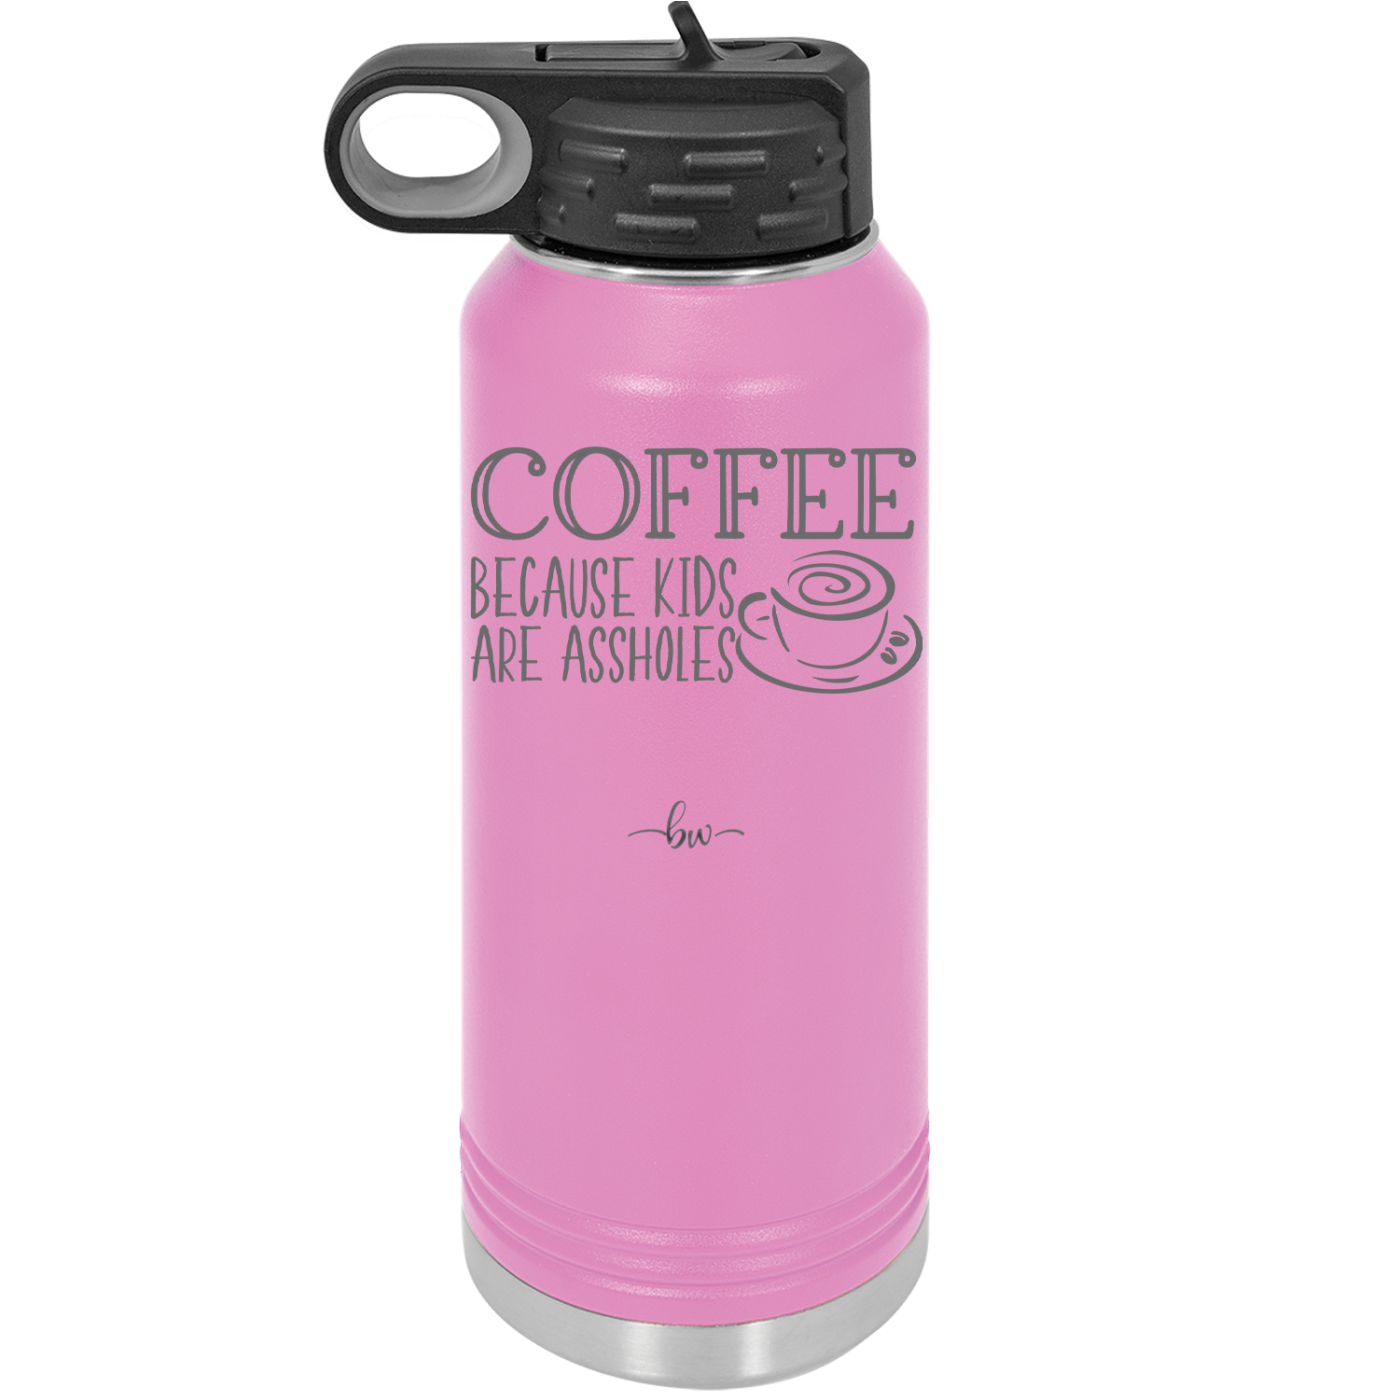 Coffee Because Kids Are Assholes with Cup and Saucer - Laser Engraved Stainless Steel Drinkware - 2199 -